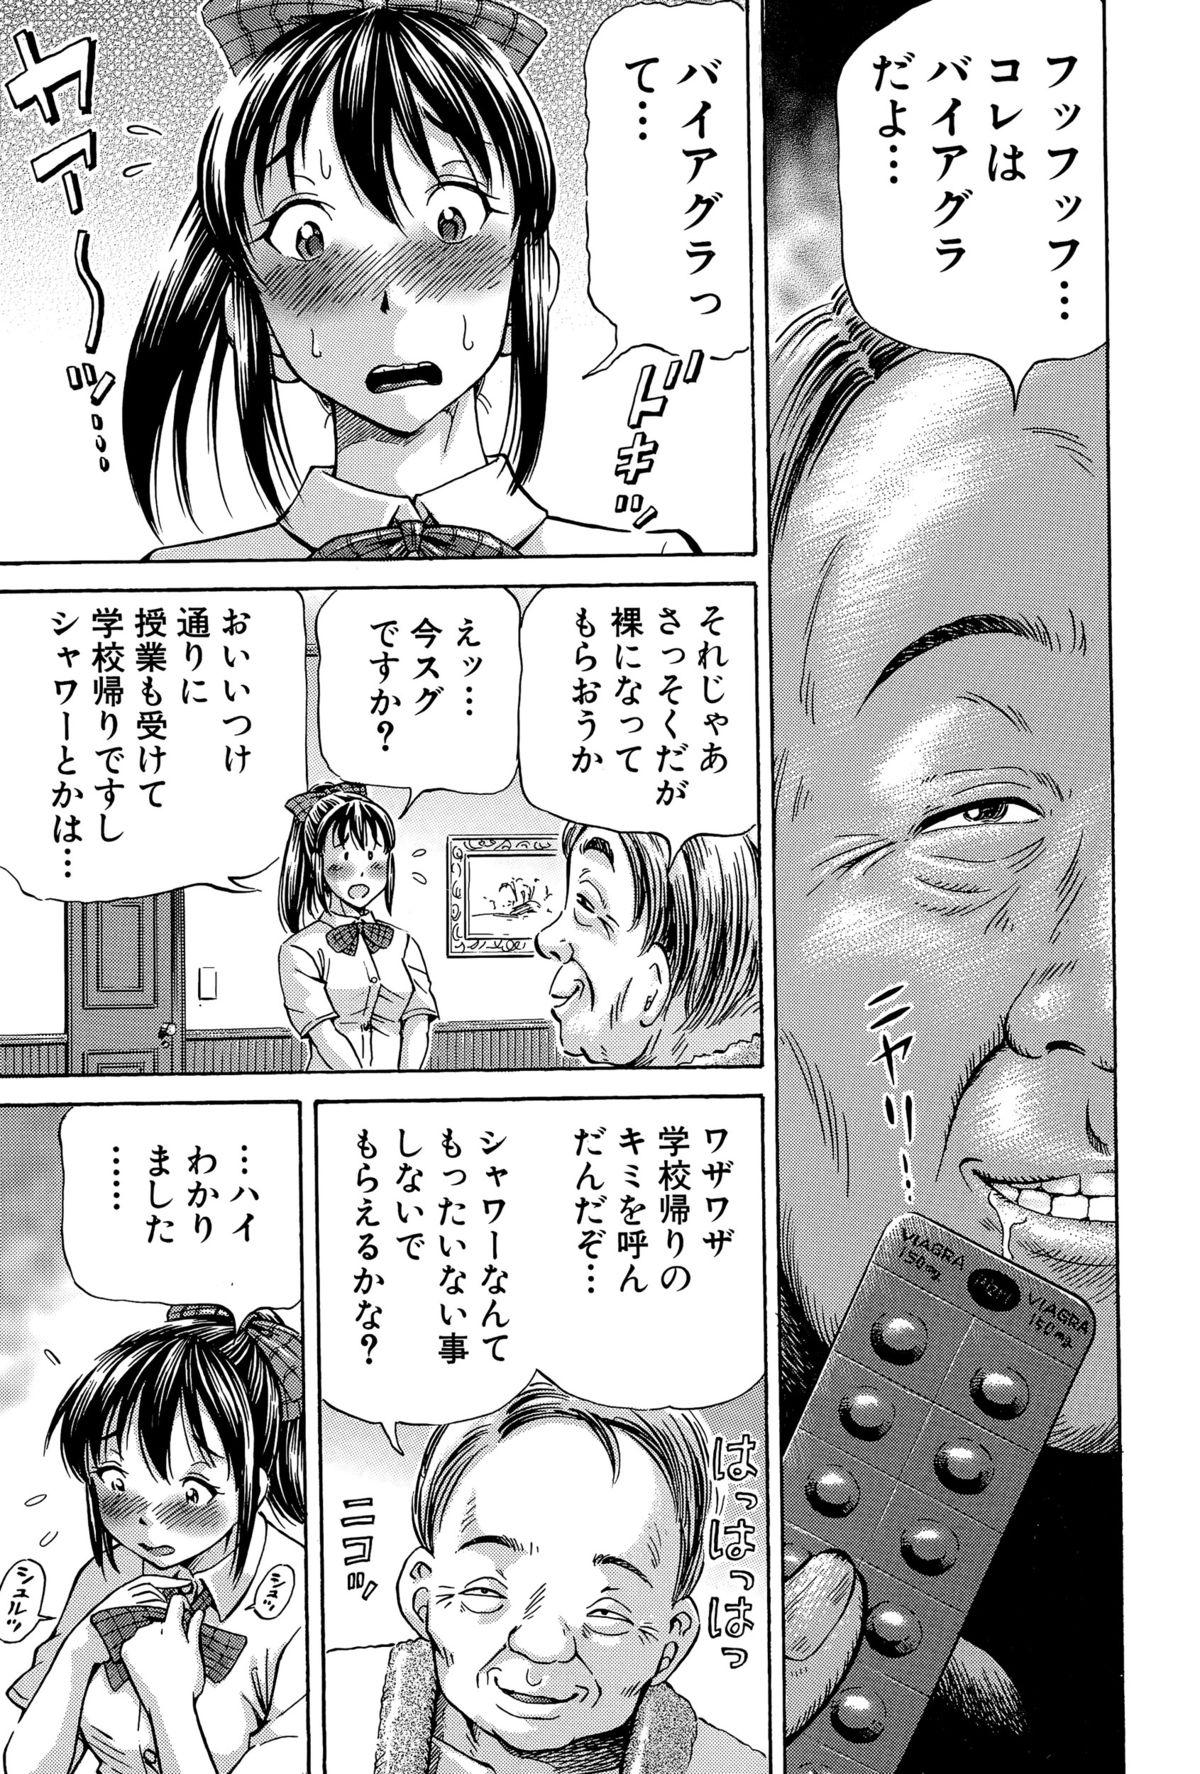 BUSTER COMIC 2015-11 204